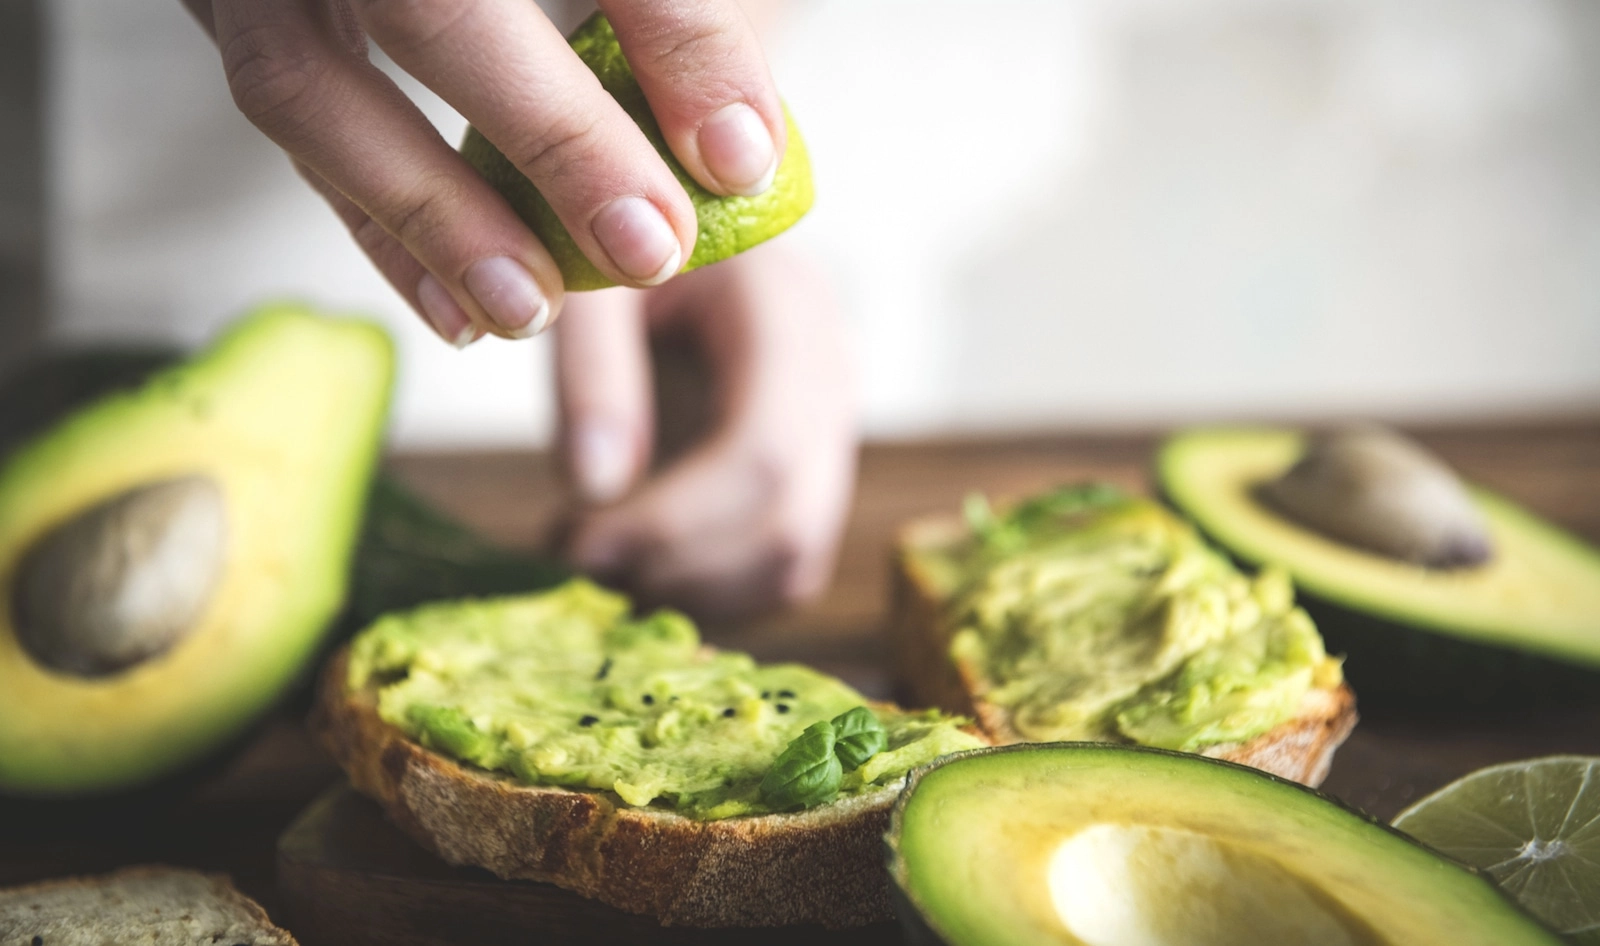 Ways to incorporate avocado into your diet